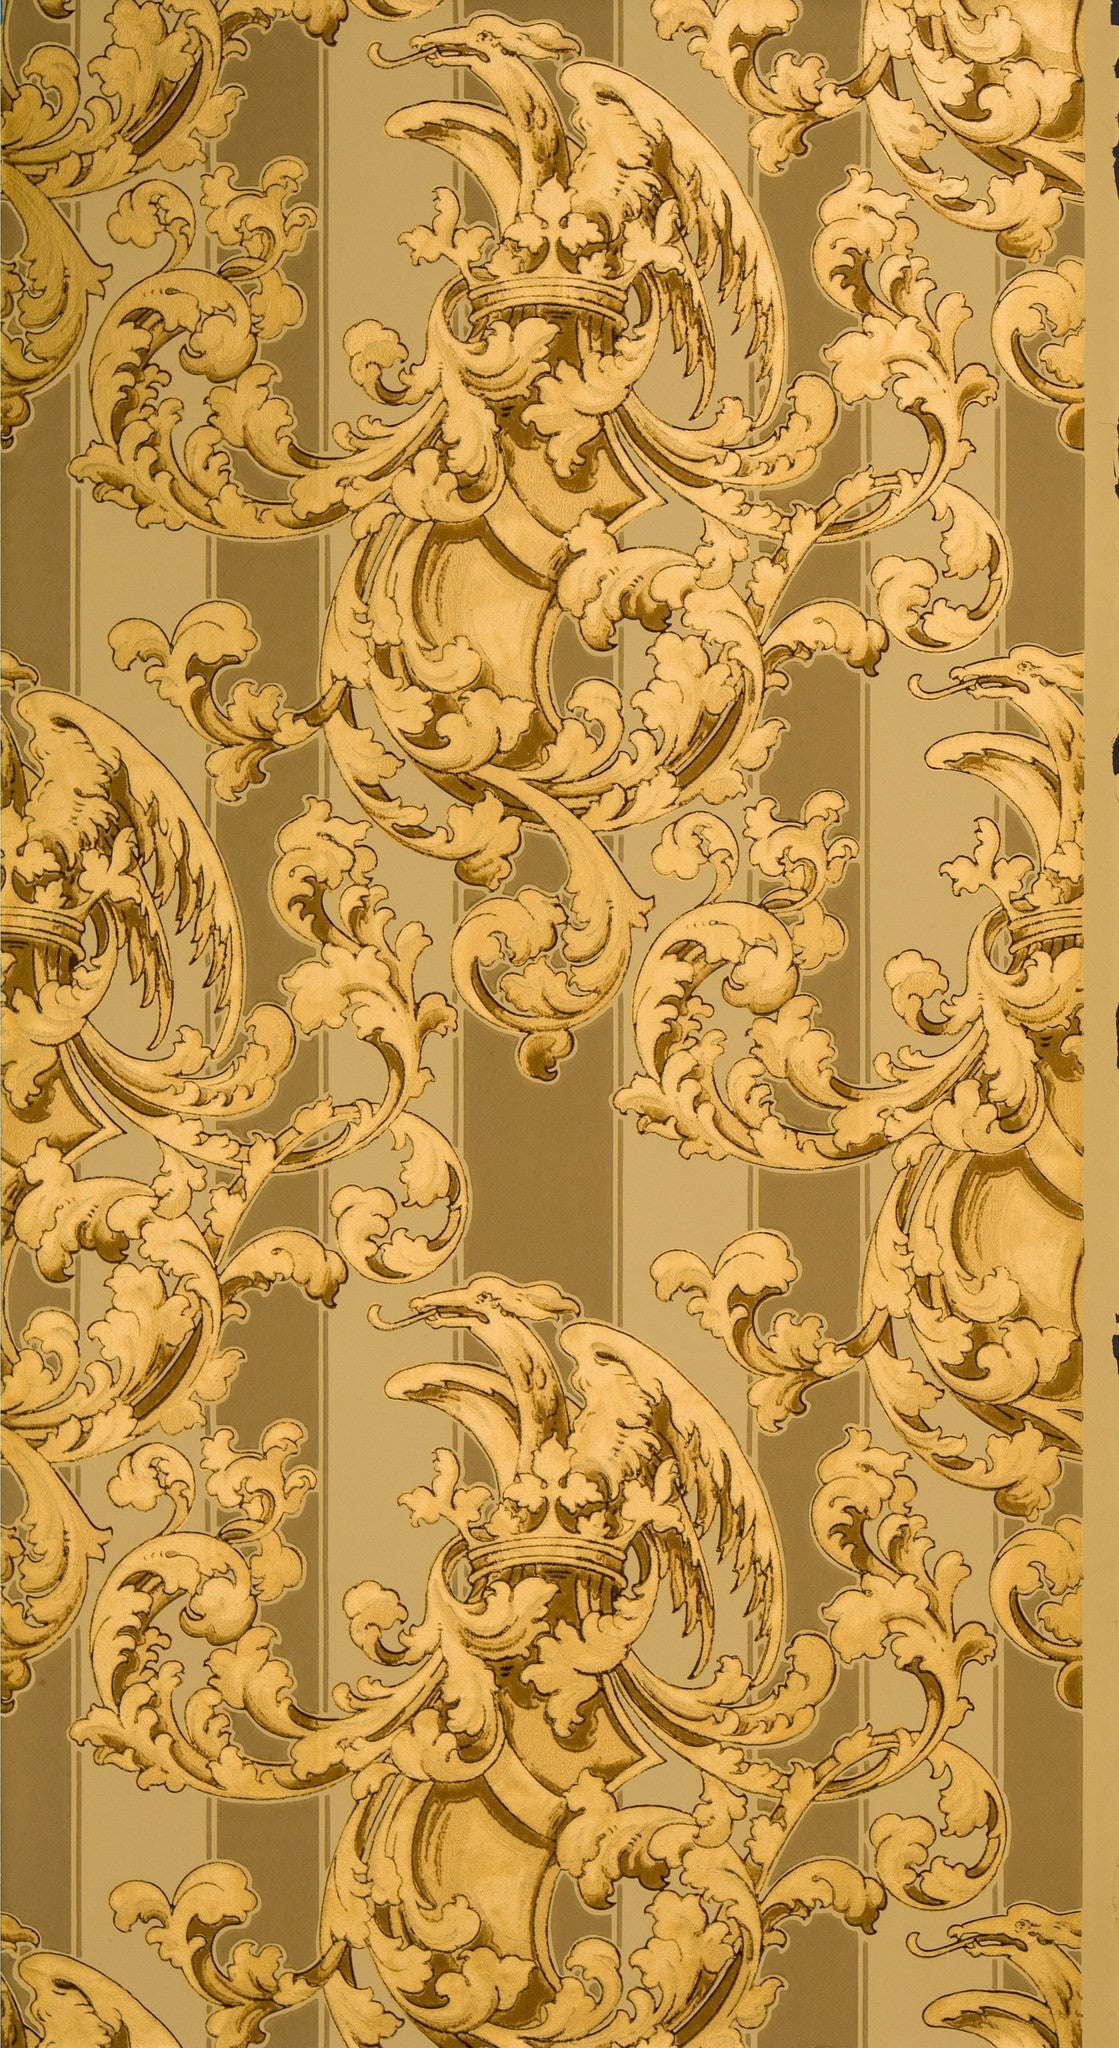 Shield, Crown and Griffin Amid Gilt Scrolls - Antique Wallpaper Remnant - SOLD OUT